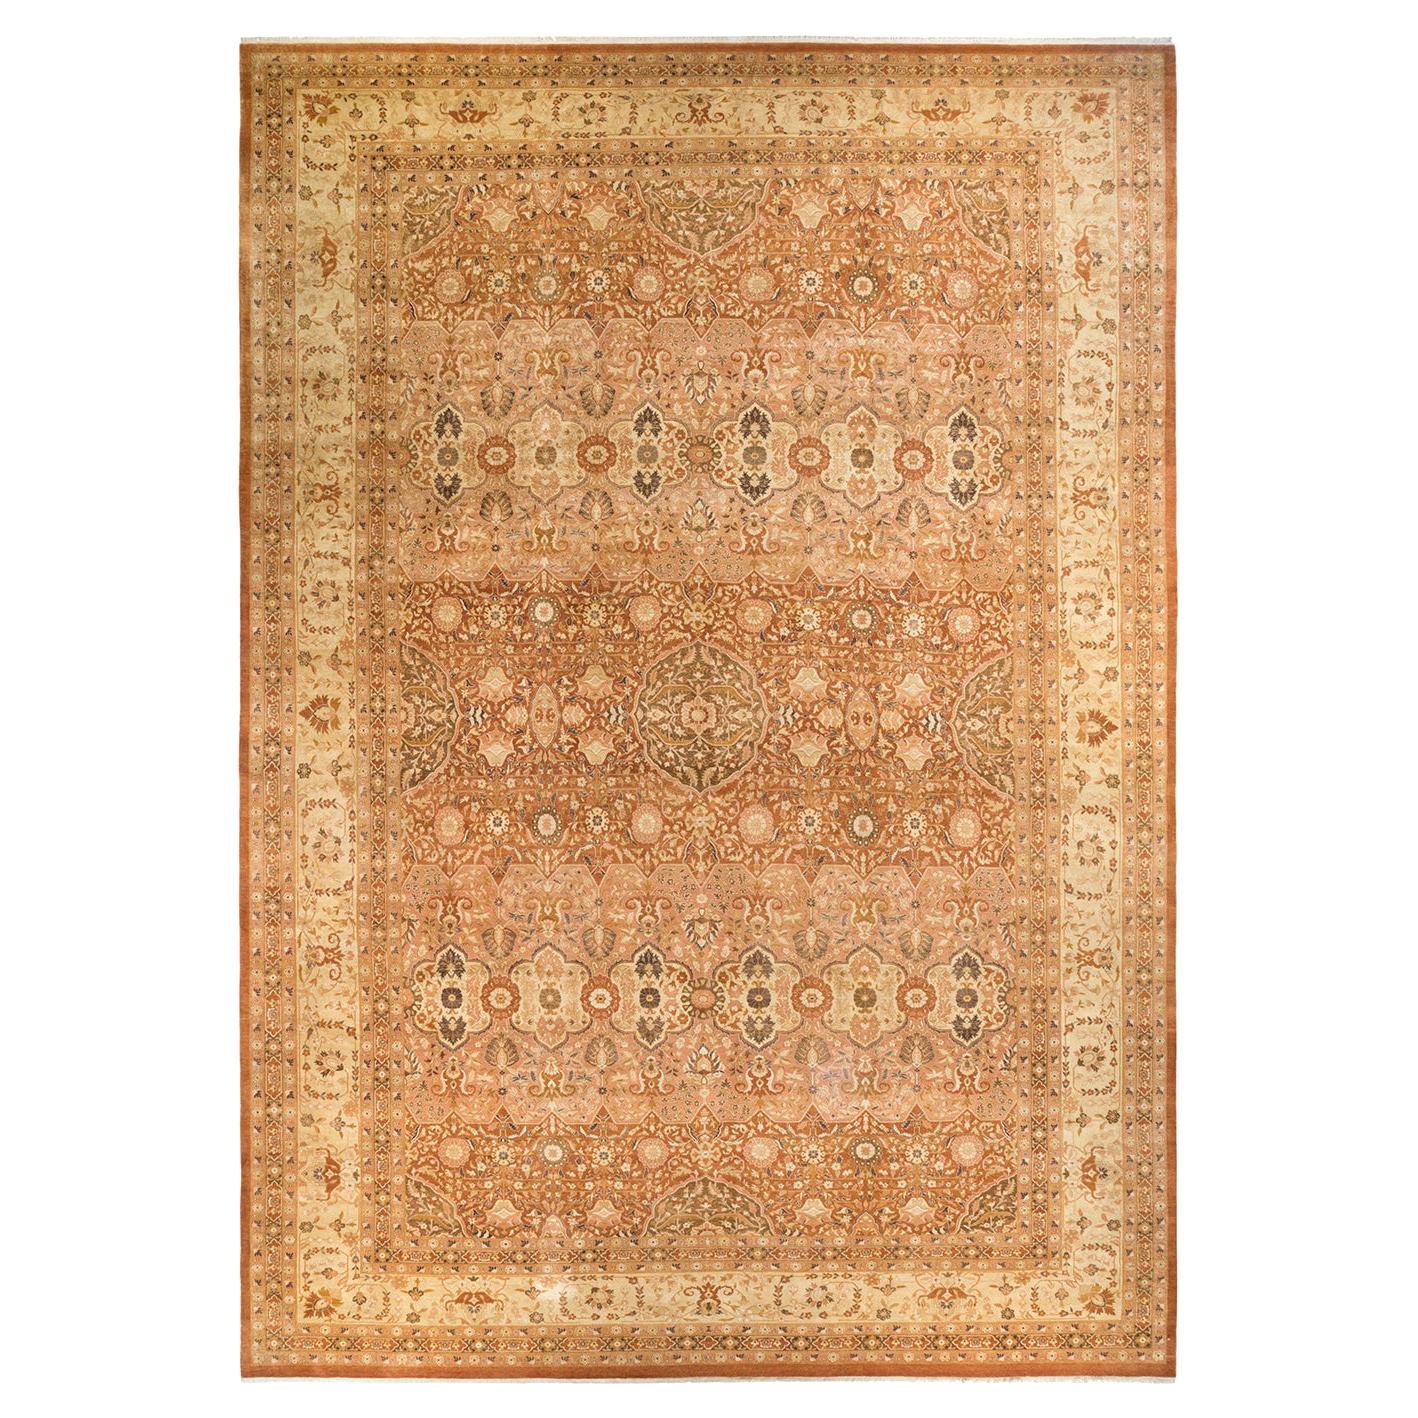 Mogul, One-of-a-Kind Hand-Knotted Area Rug, Brown